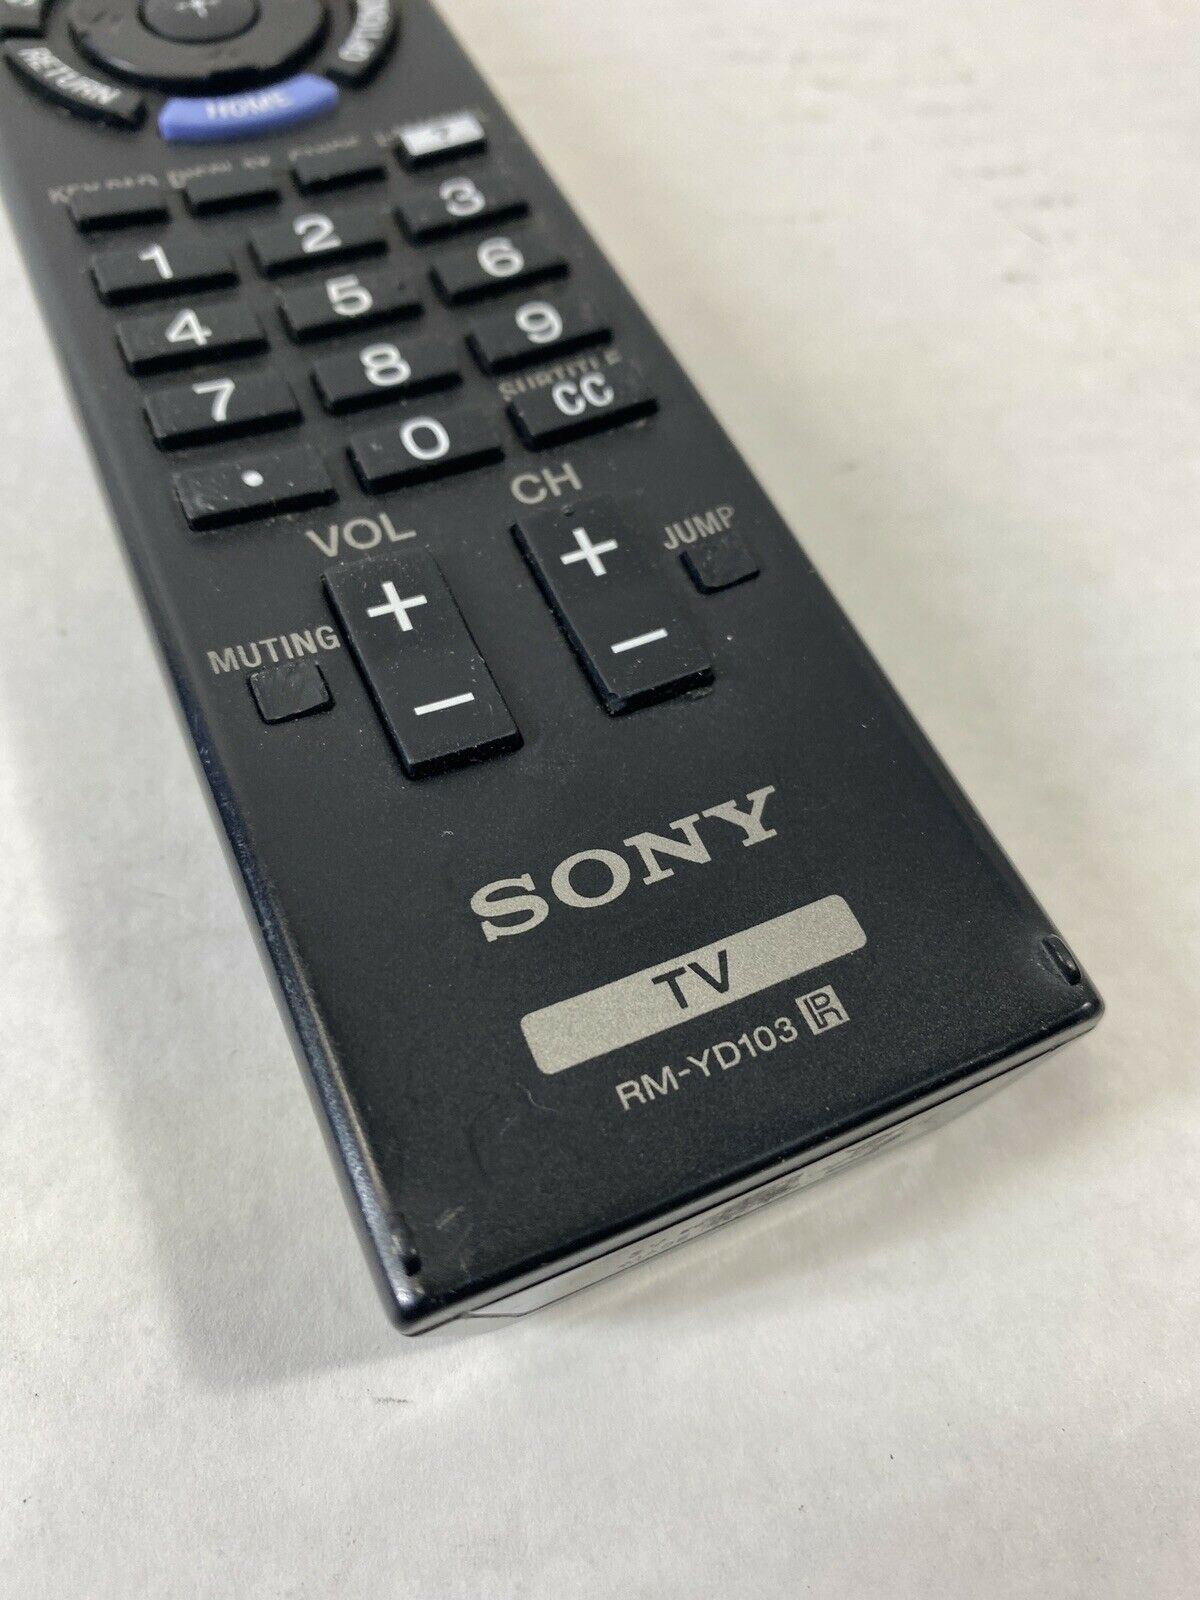 New Universal Replacement Remote Control for Sony TV Bravia Tested !